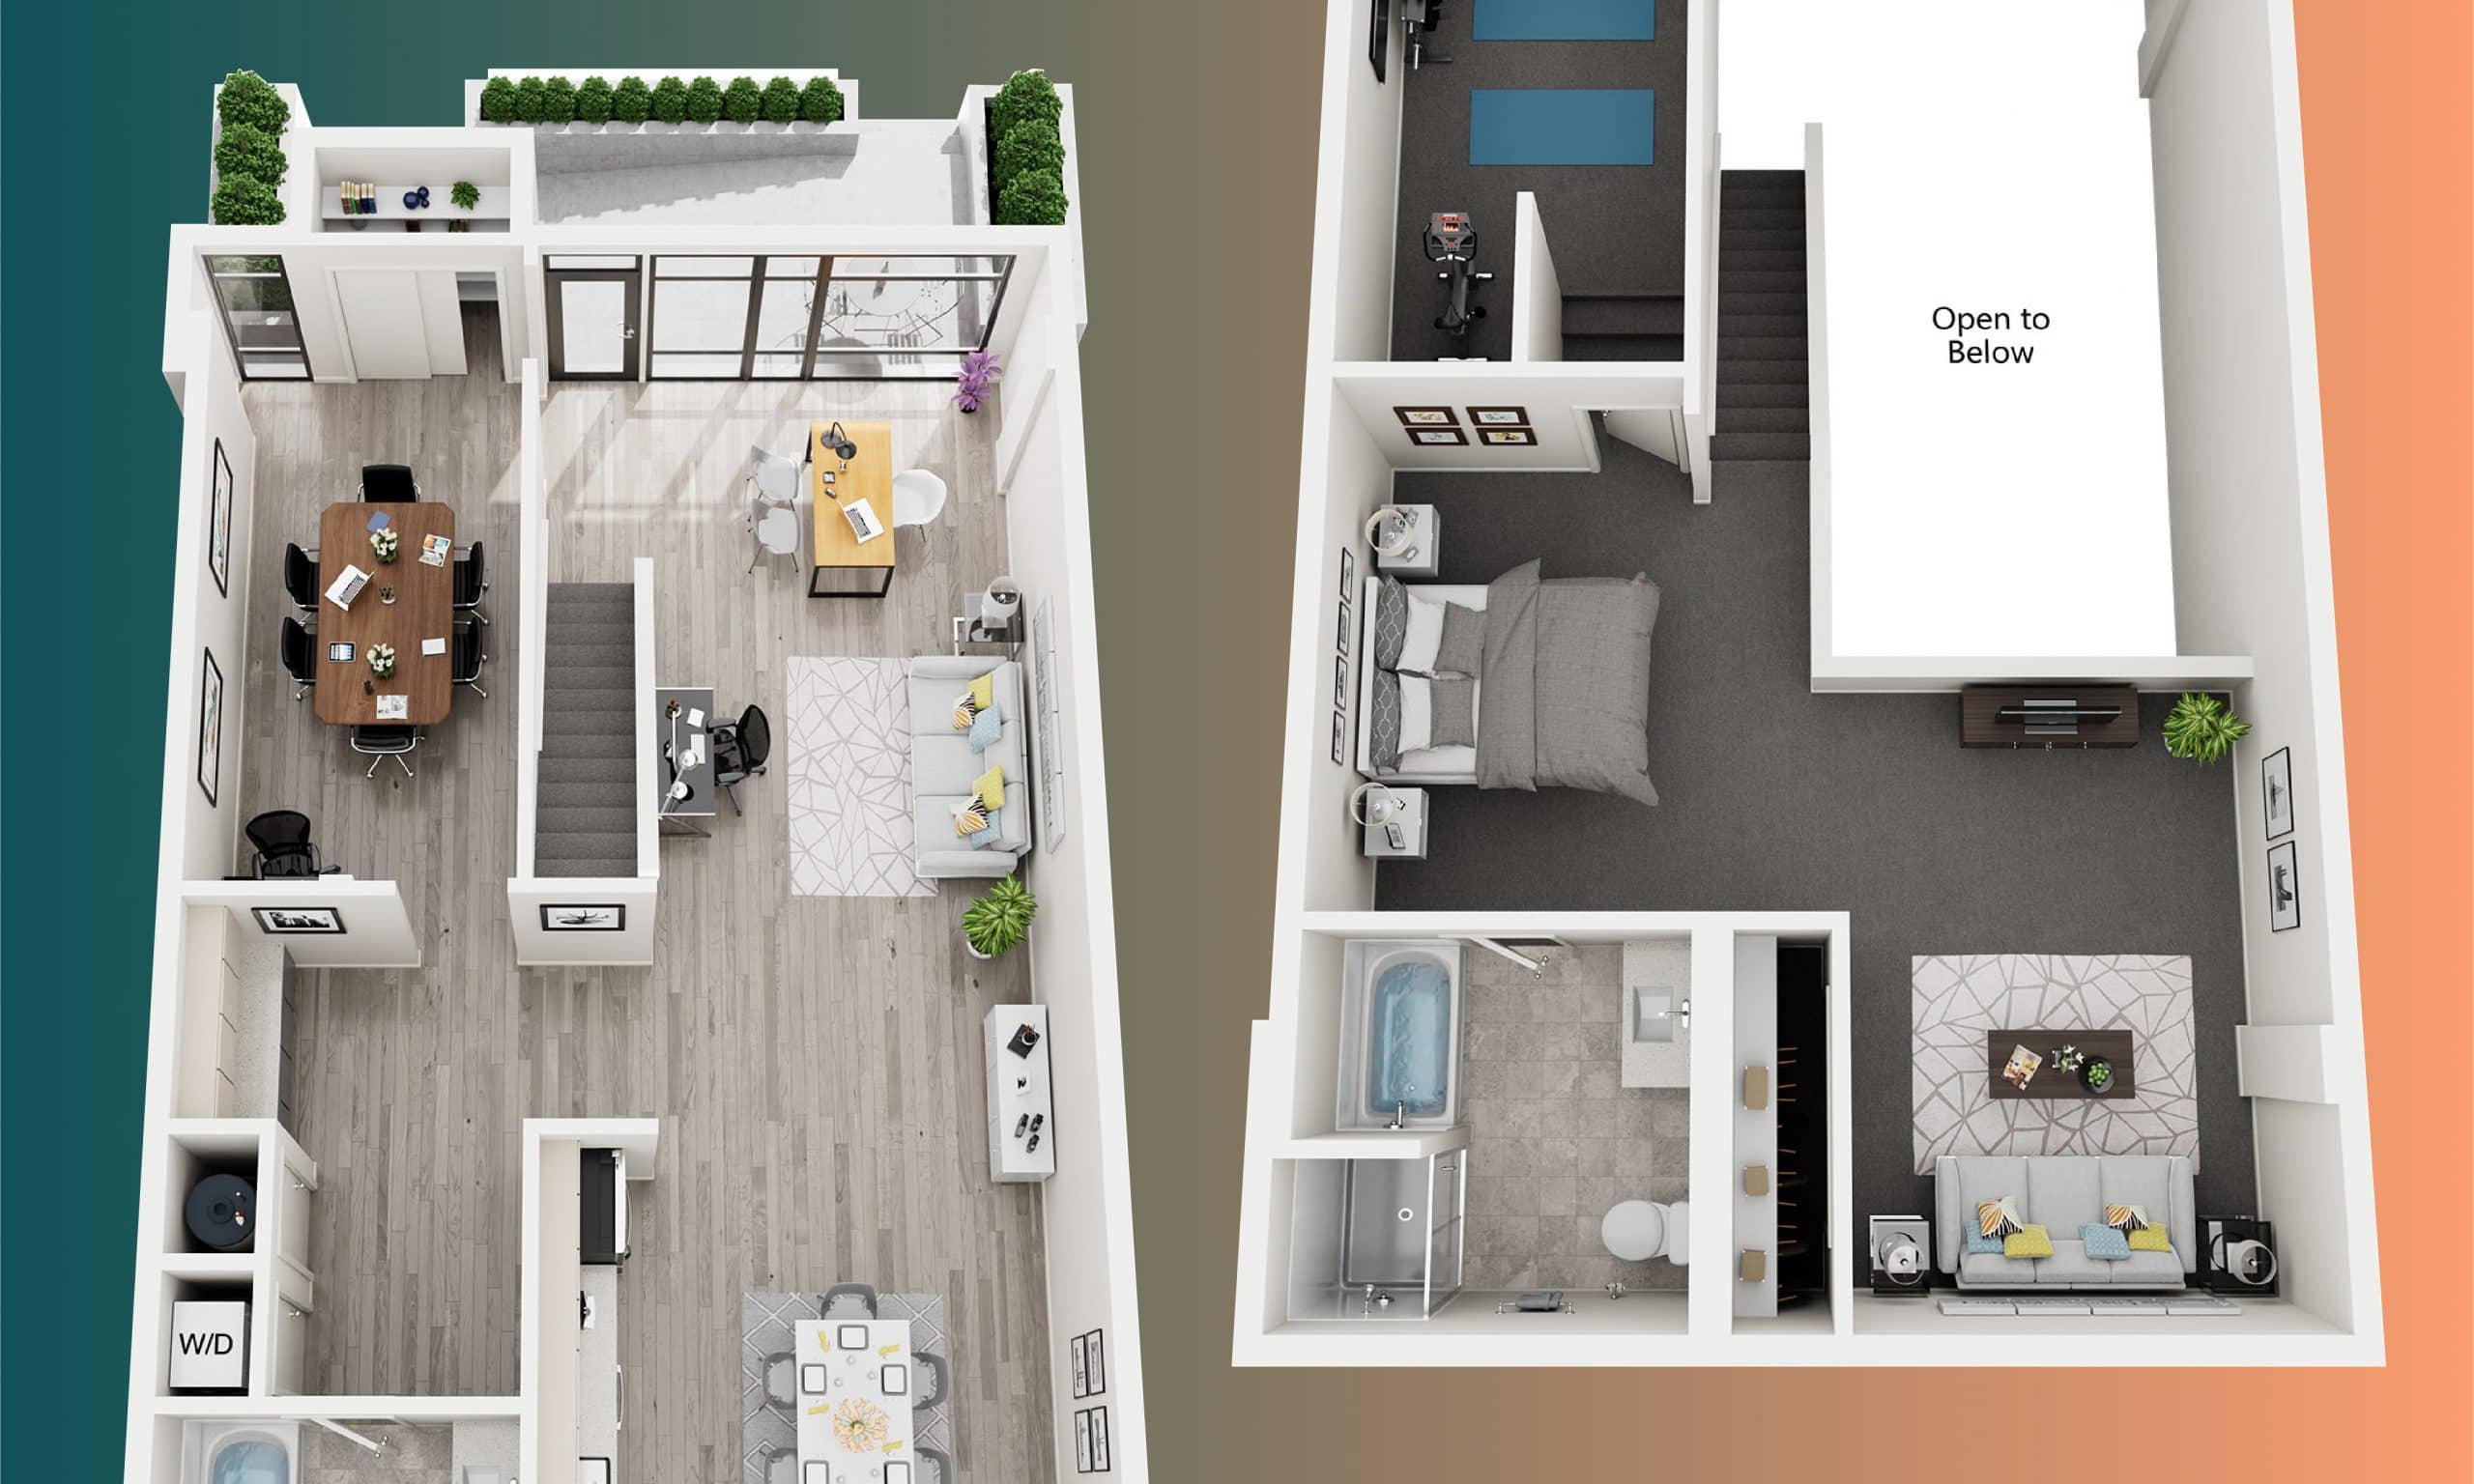 P11creative News - Add new depth to your live/work marketing: 3D Floor Plans at Vestalia